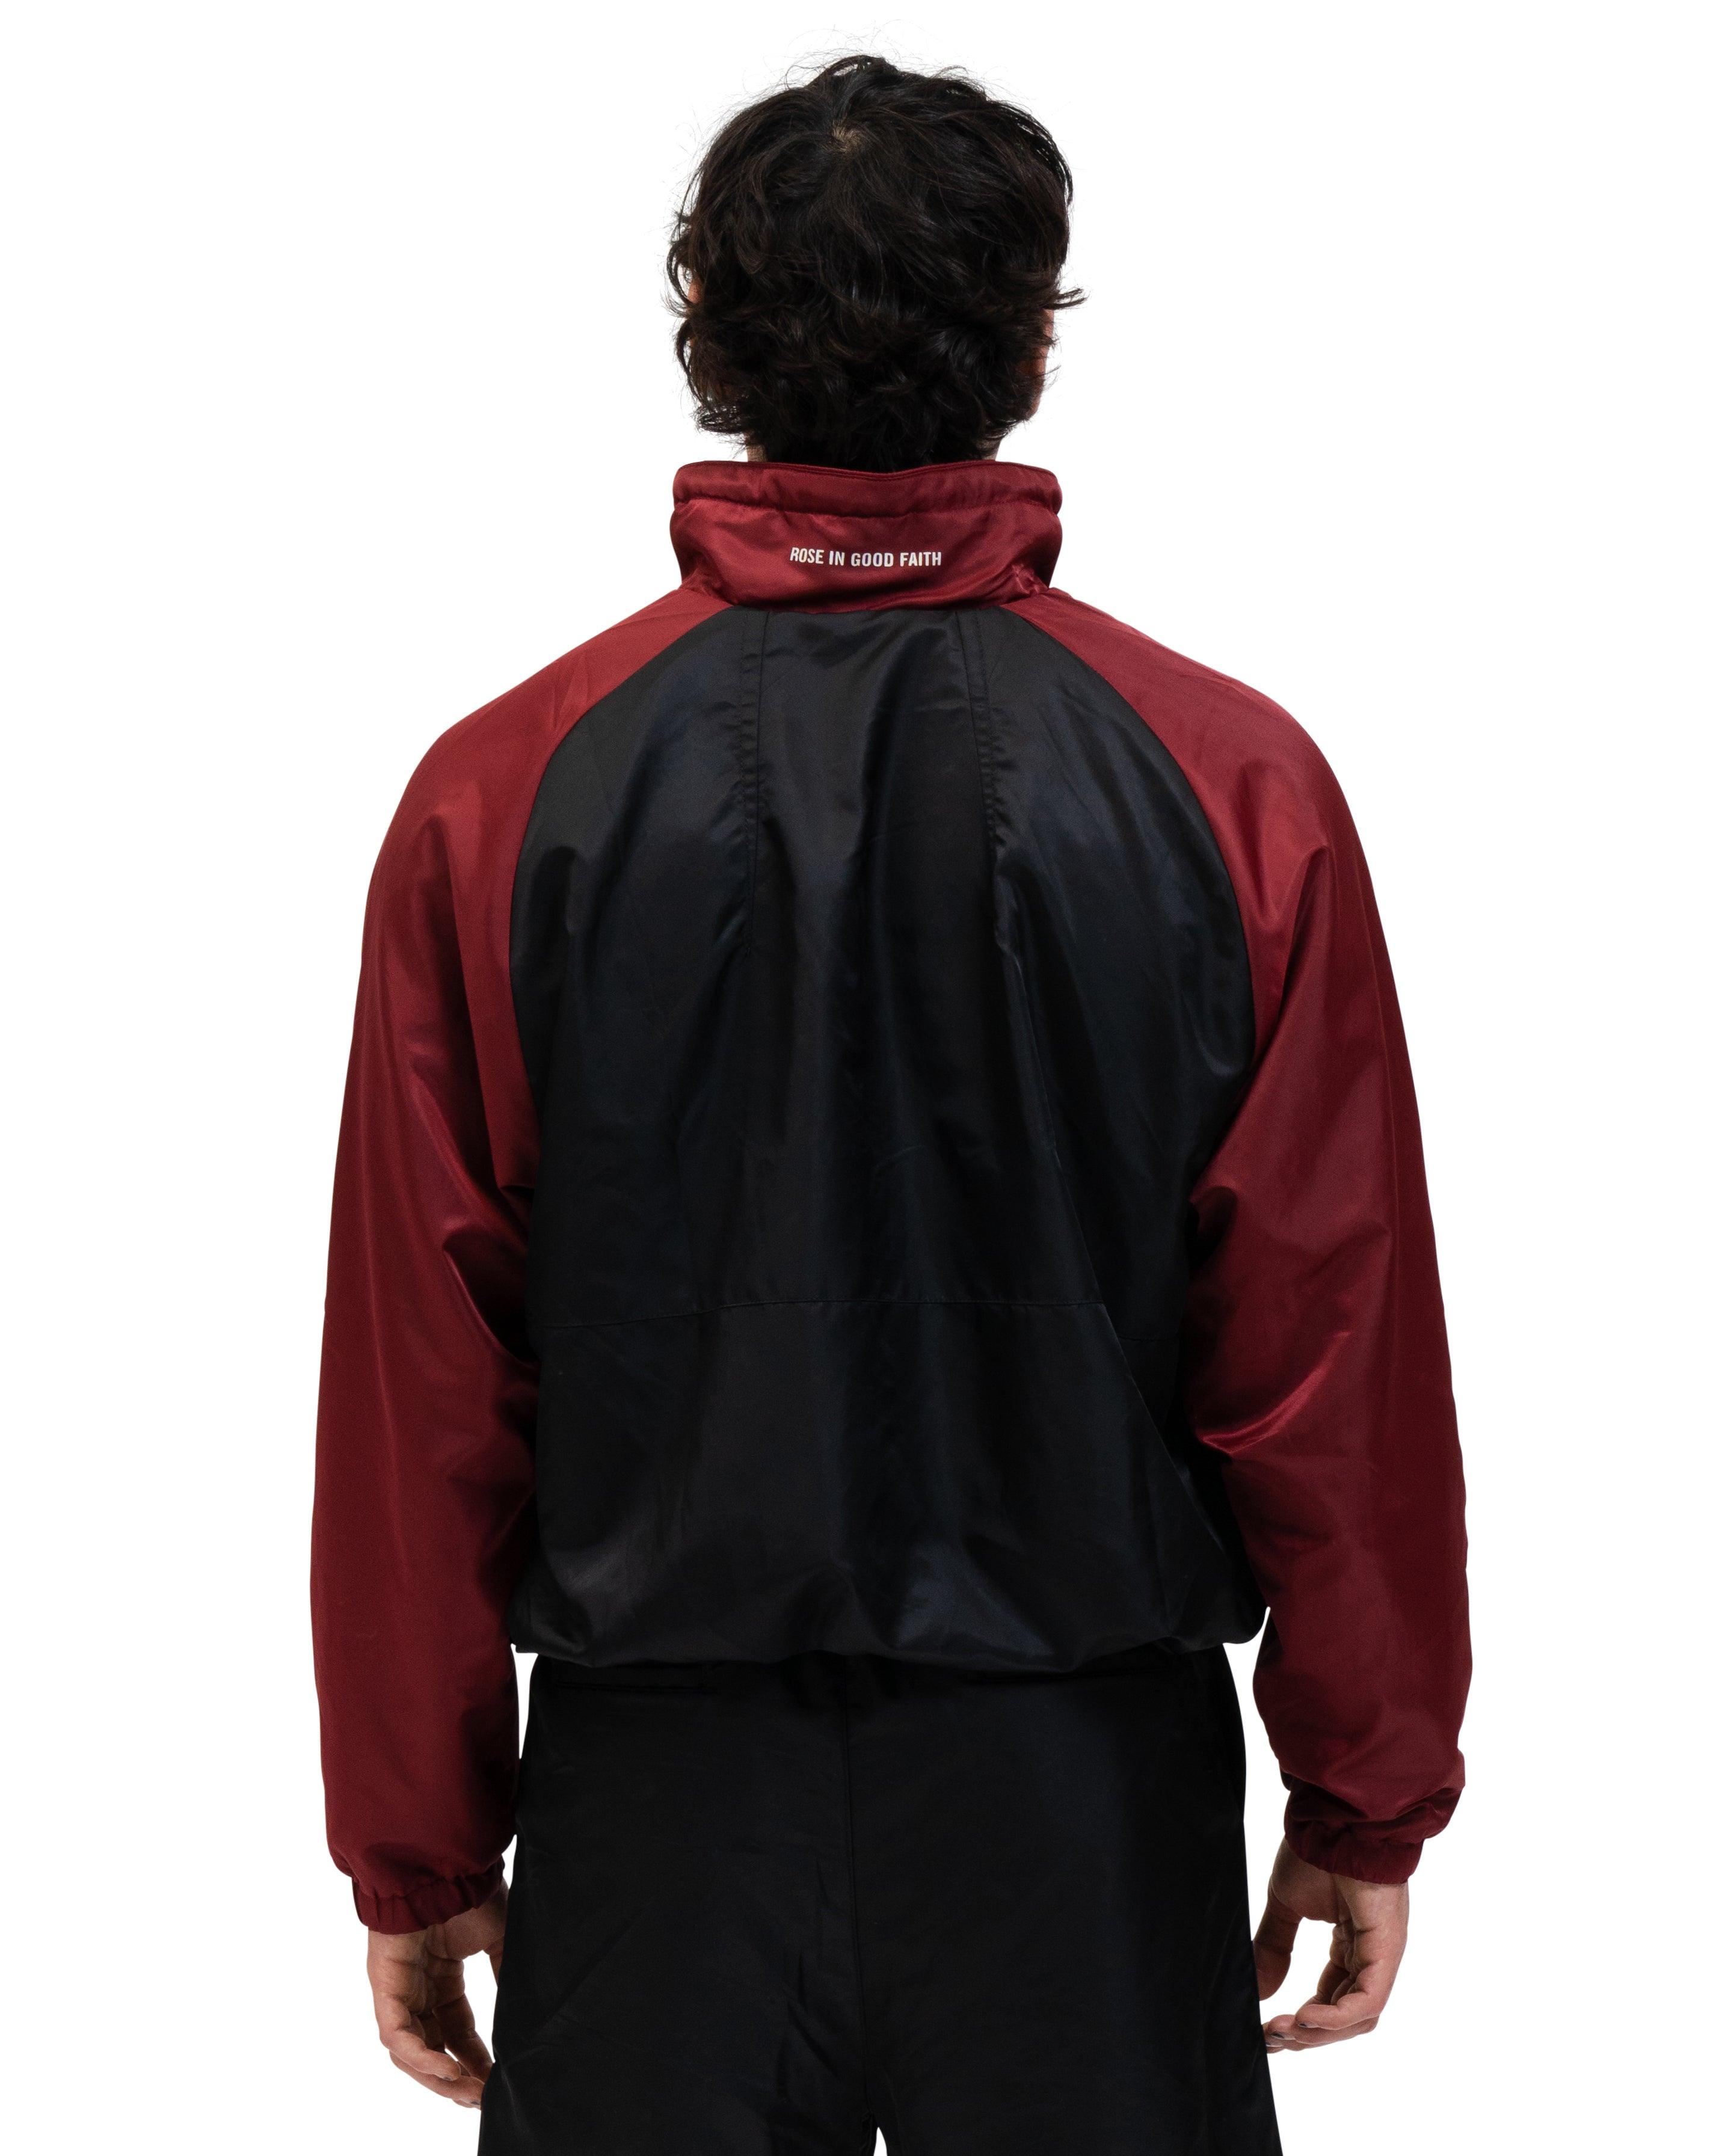 SUEDE LINED TRACK BOMBER BLK/RED - SUEDE LINED TRACK BOMBER BLK/RED - ROSE IN GOOD FAITH